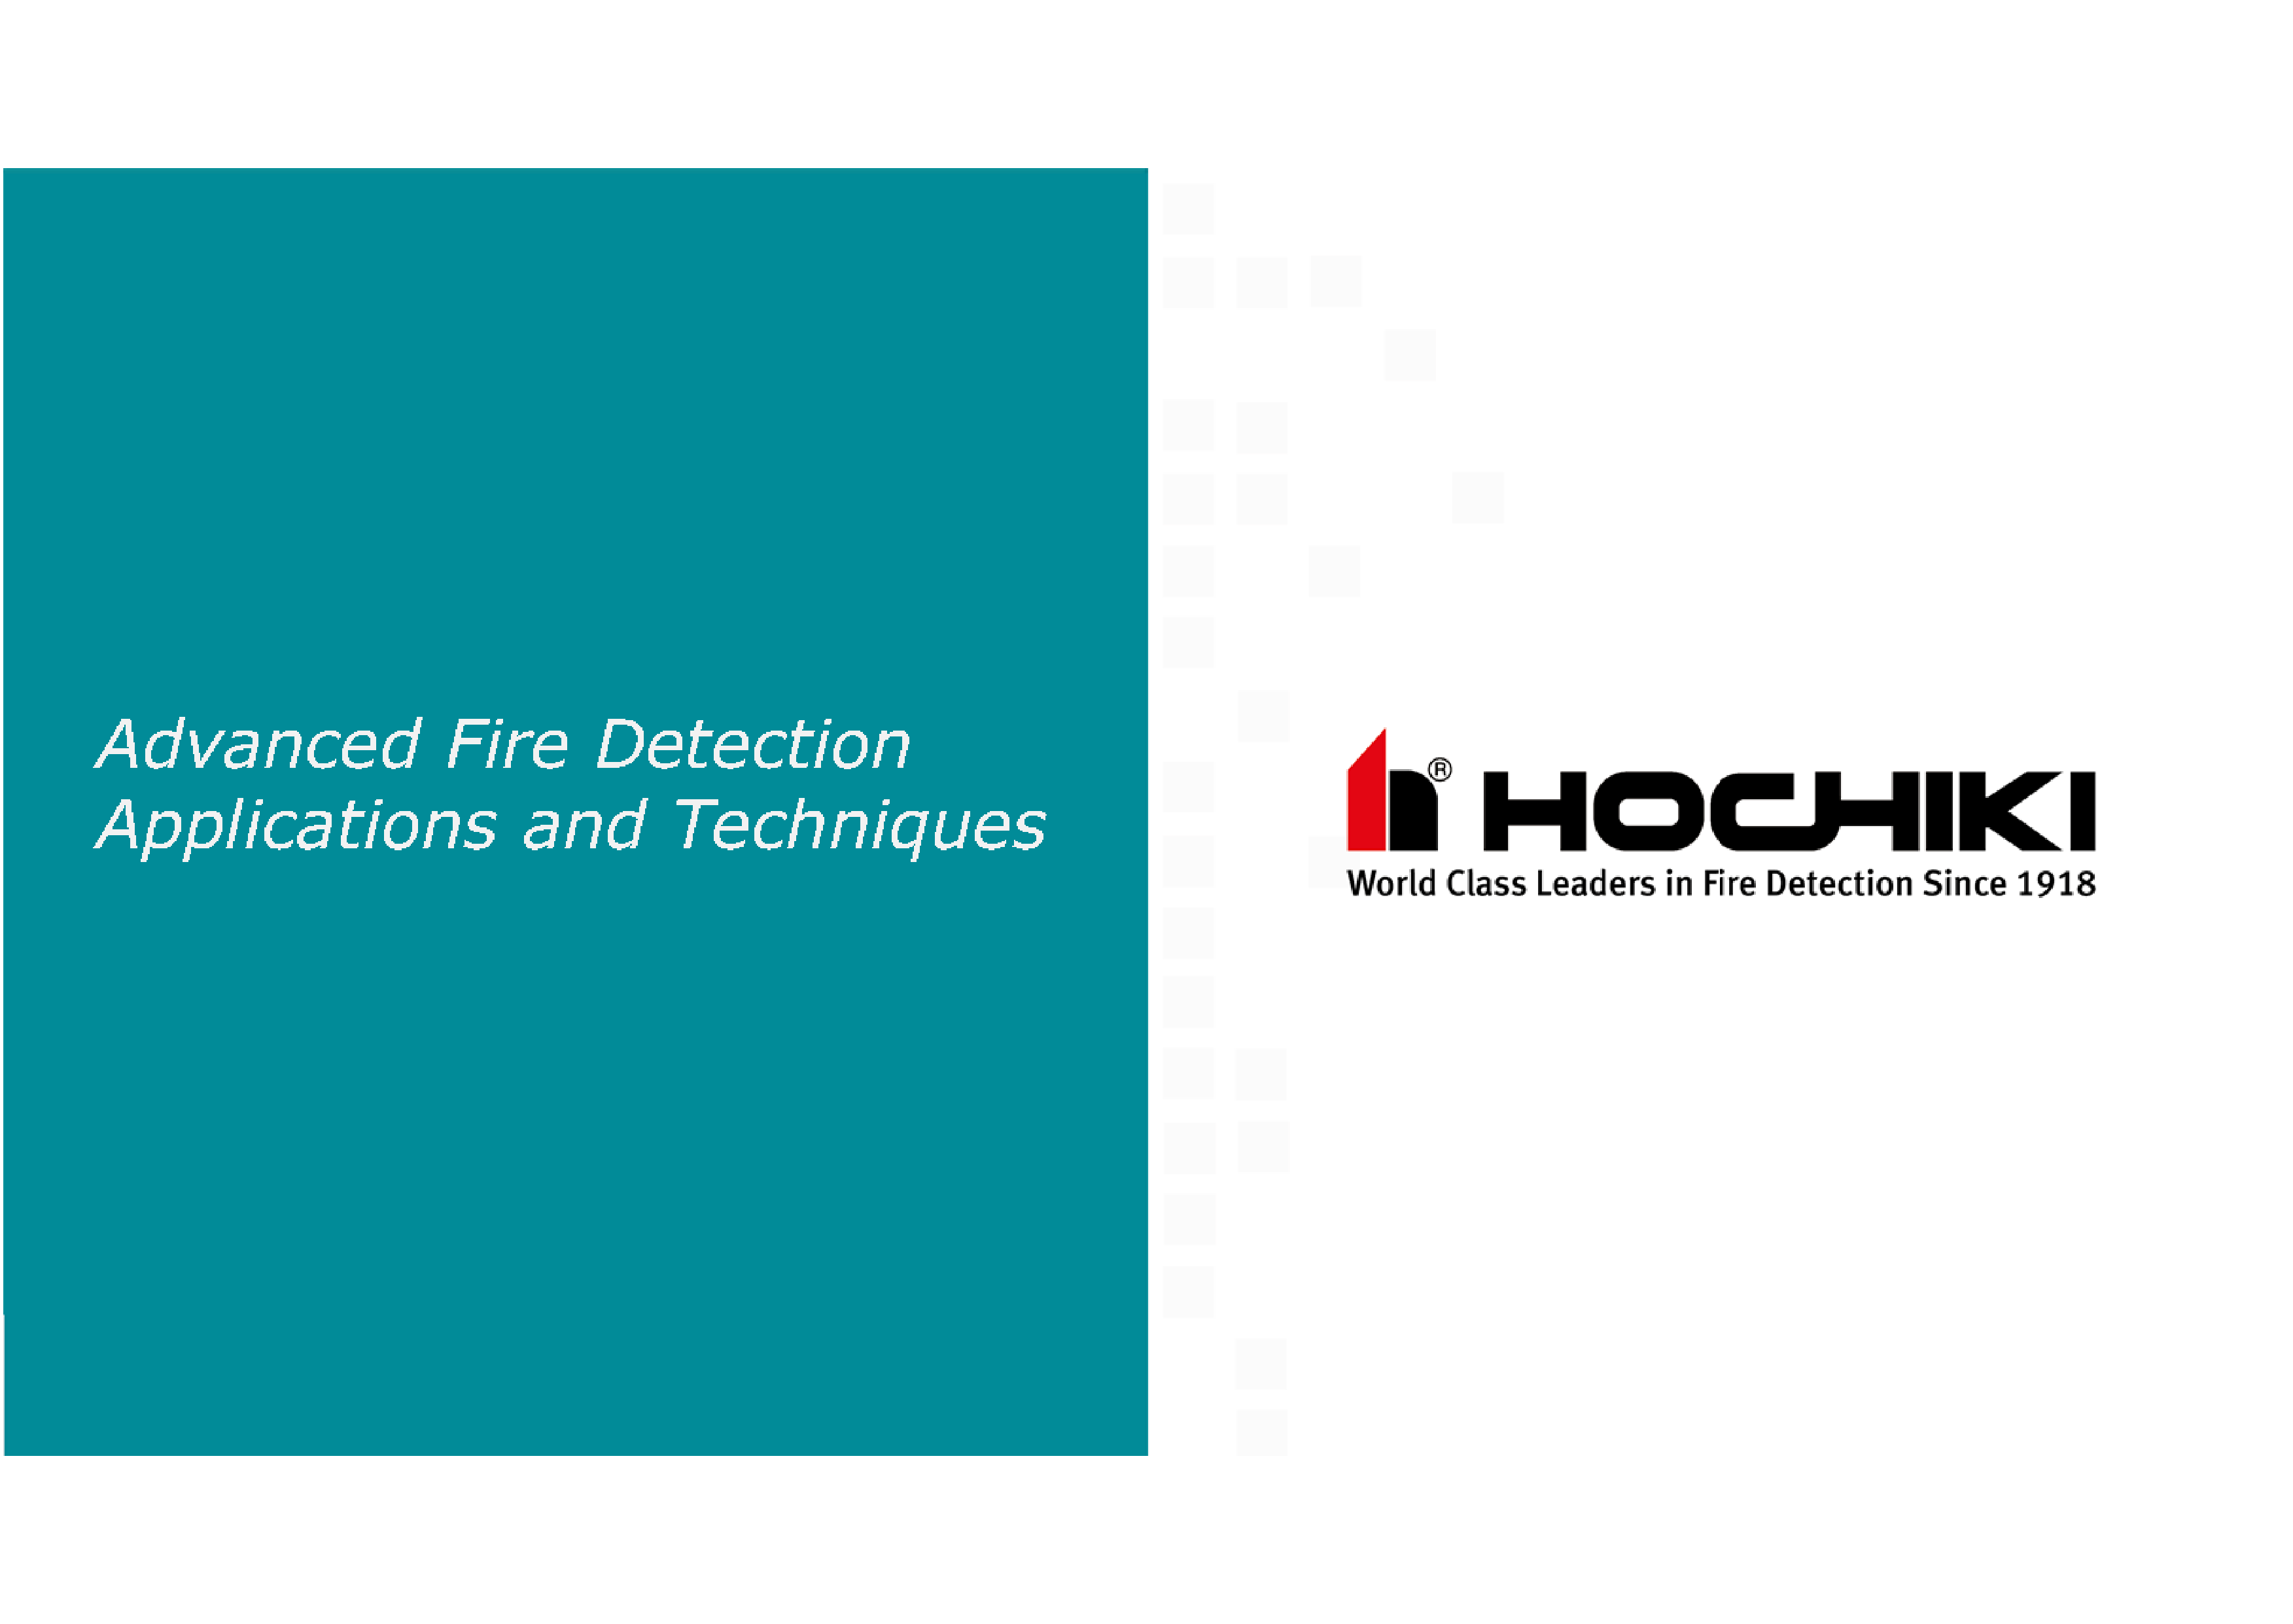 Advanced Fire Detection Applications and Techniques